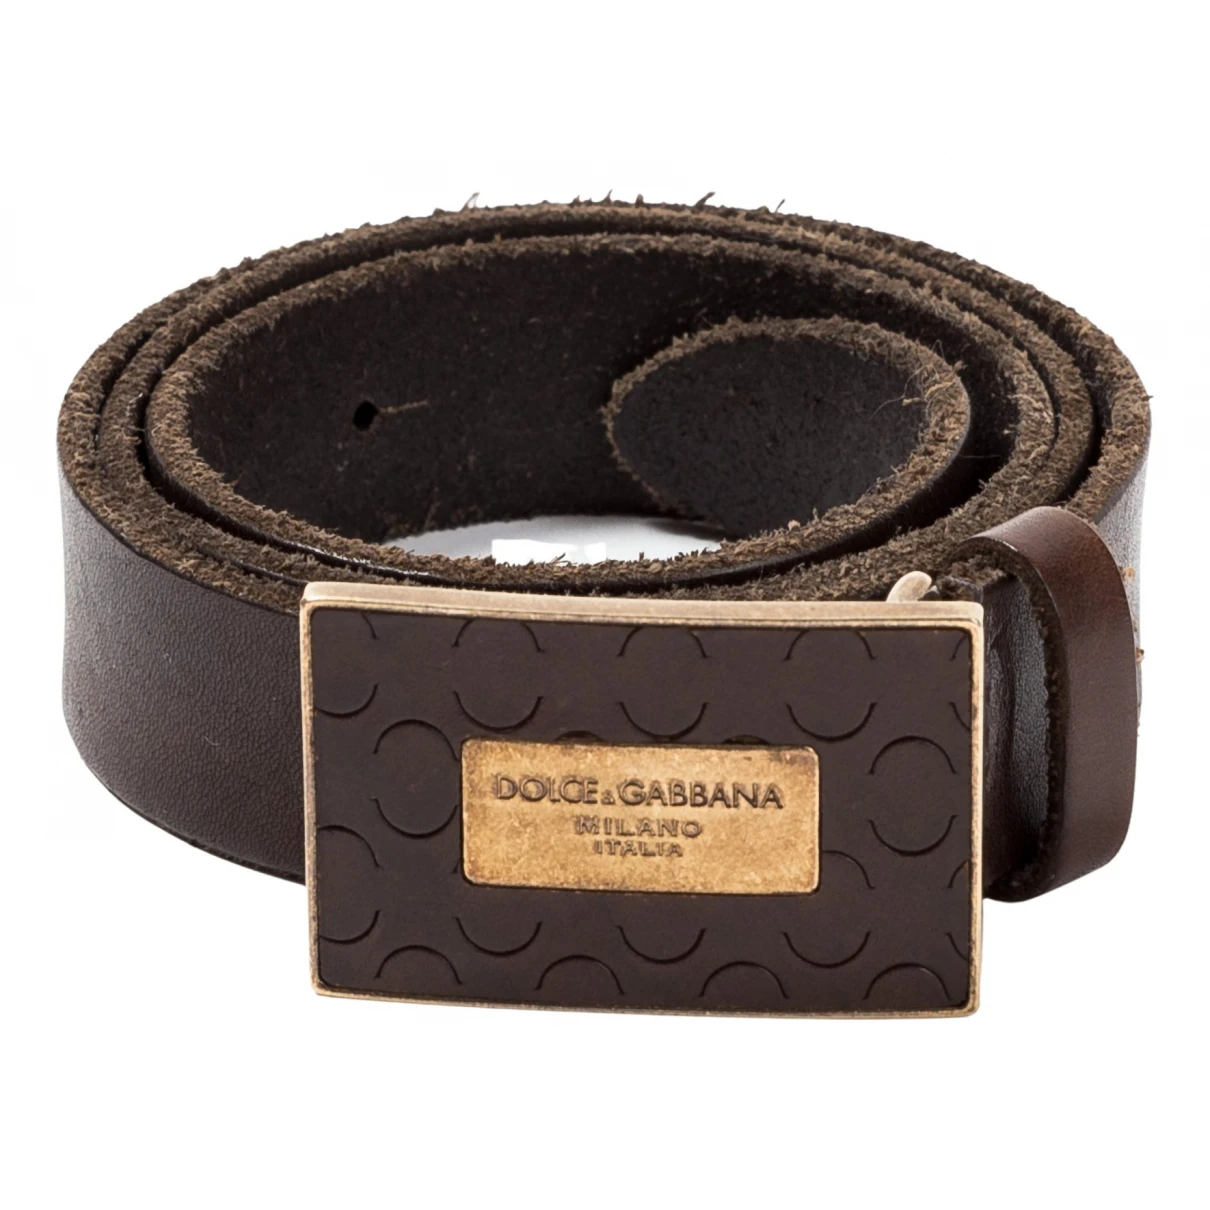 accessories Dolce & Gabbana belts for Female Leather 80 cm. Used condition